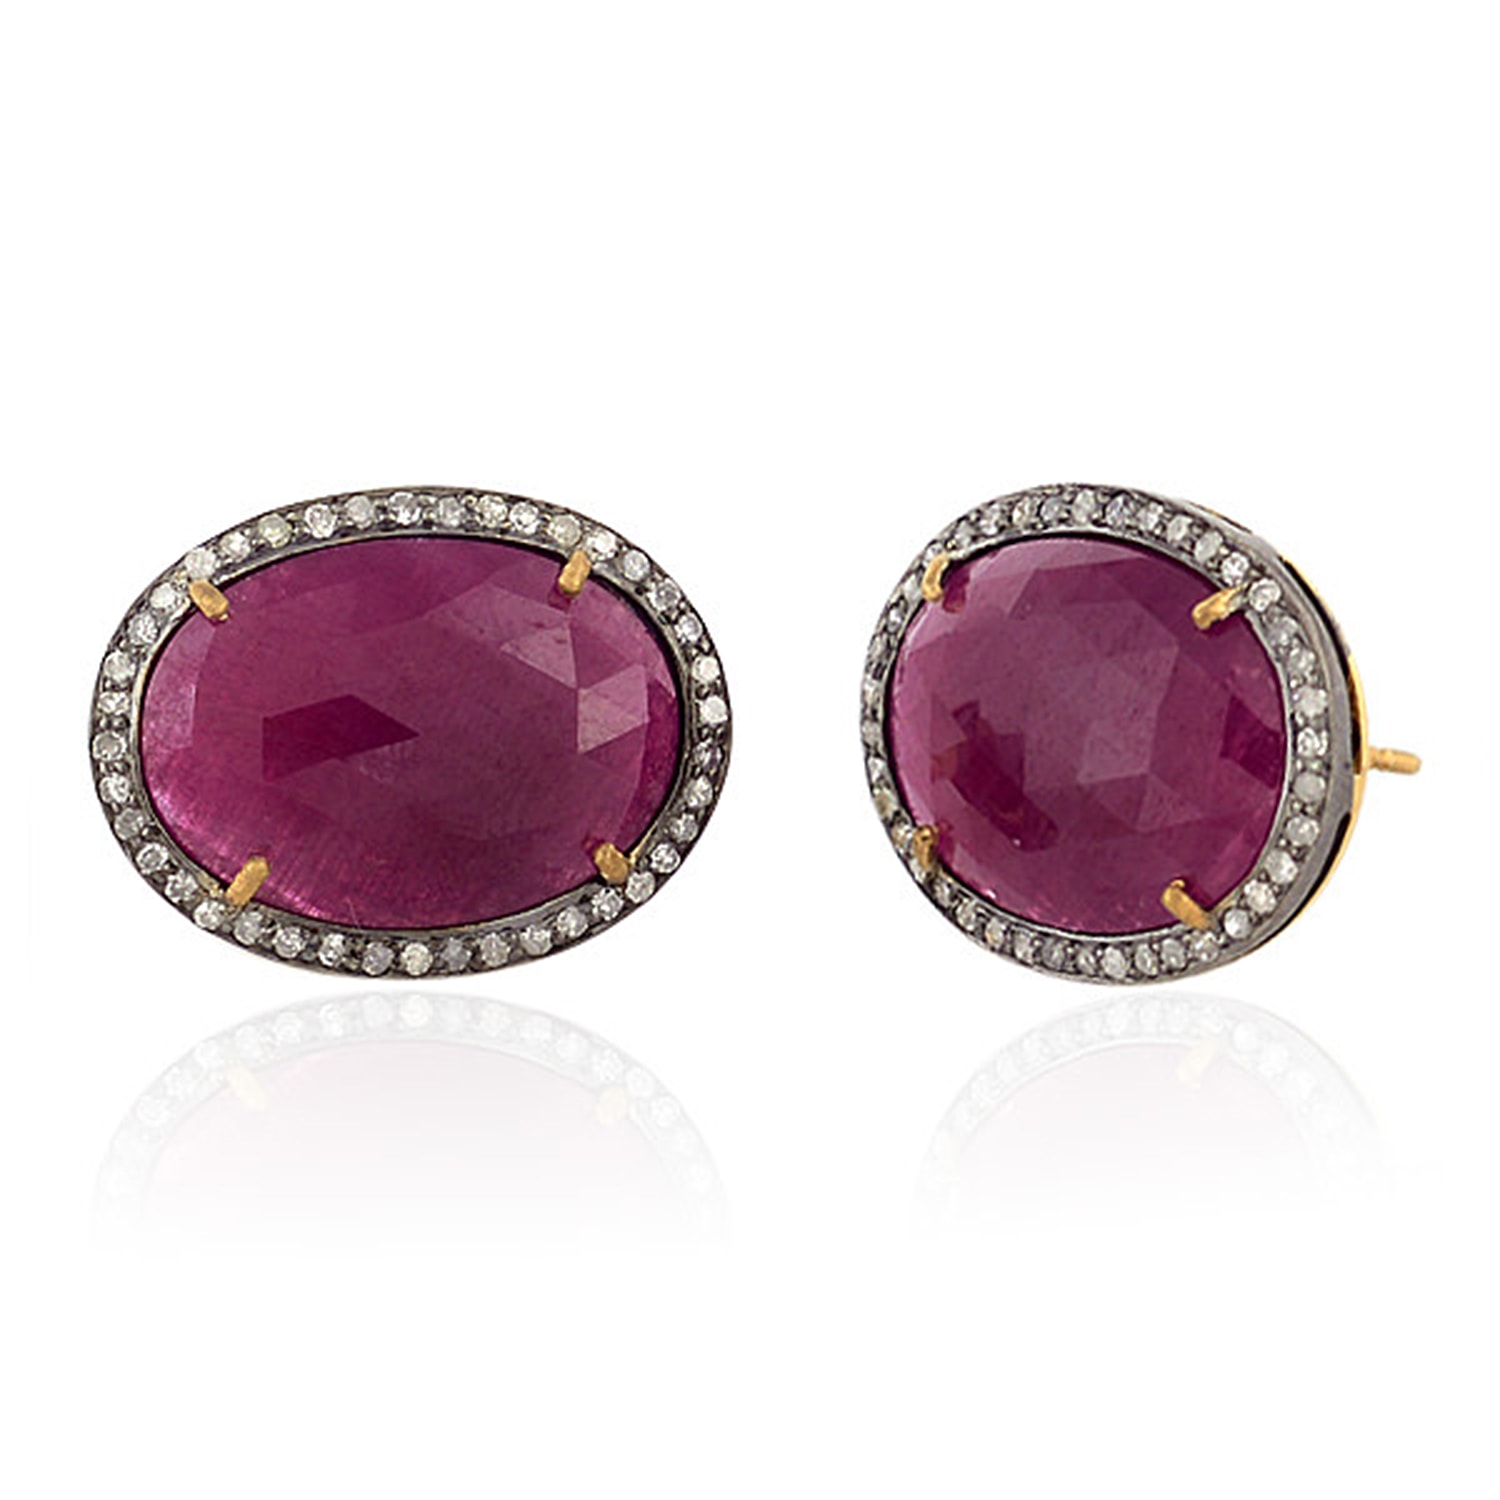 Women’s Silver / White / Red Oval Ruby Pave Diamond 18K Gold 925 Sterling Silver Stud Earrings Artisan